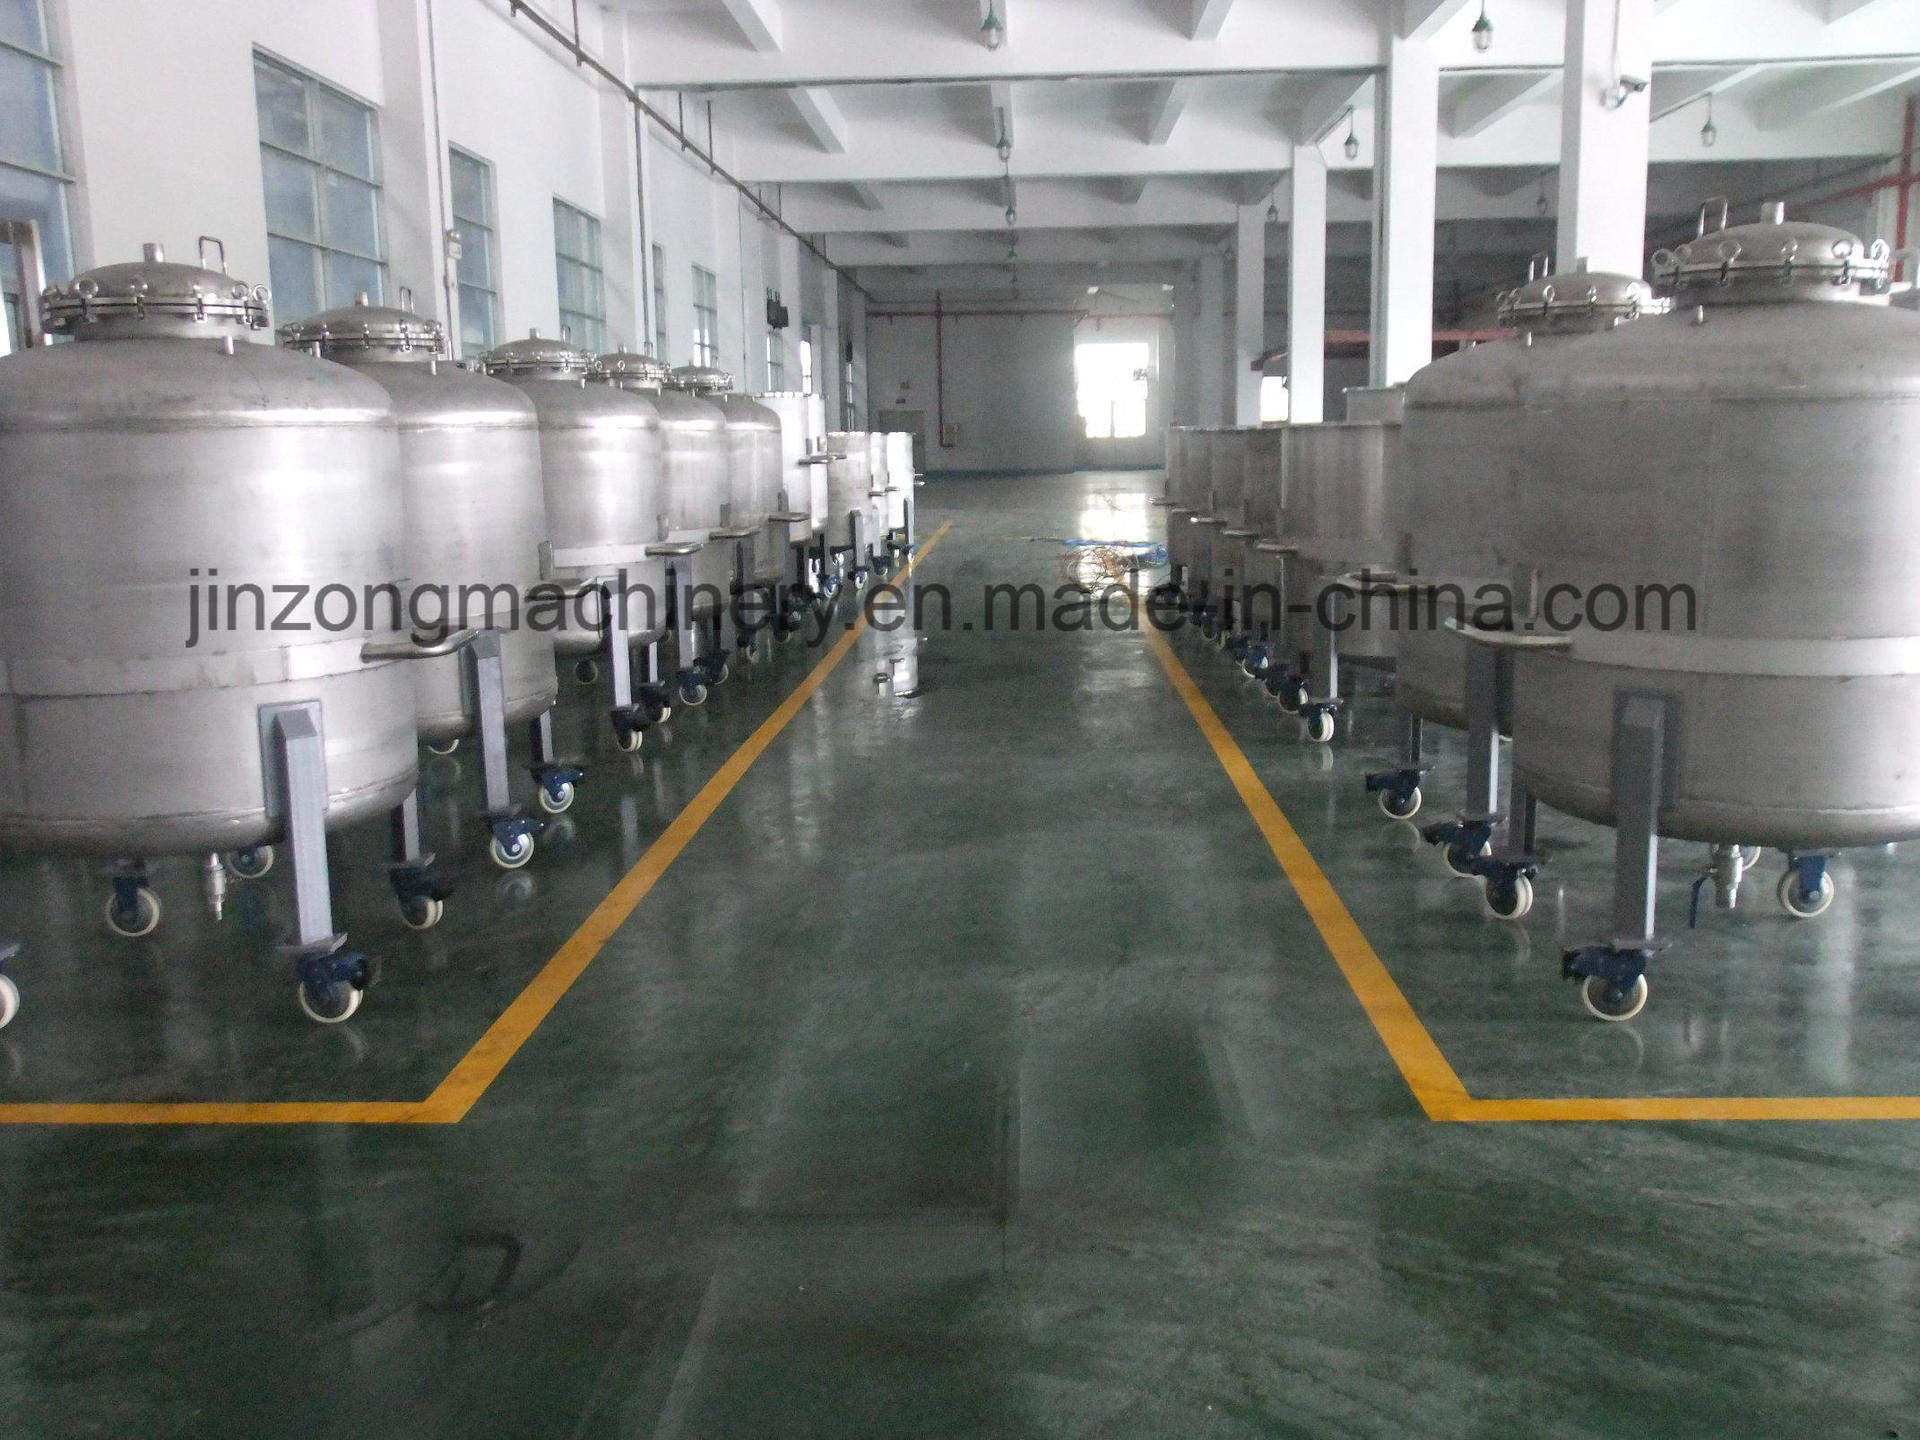 Stainless Steel Storage Tank Vertical Type and Horizontal Type